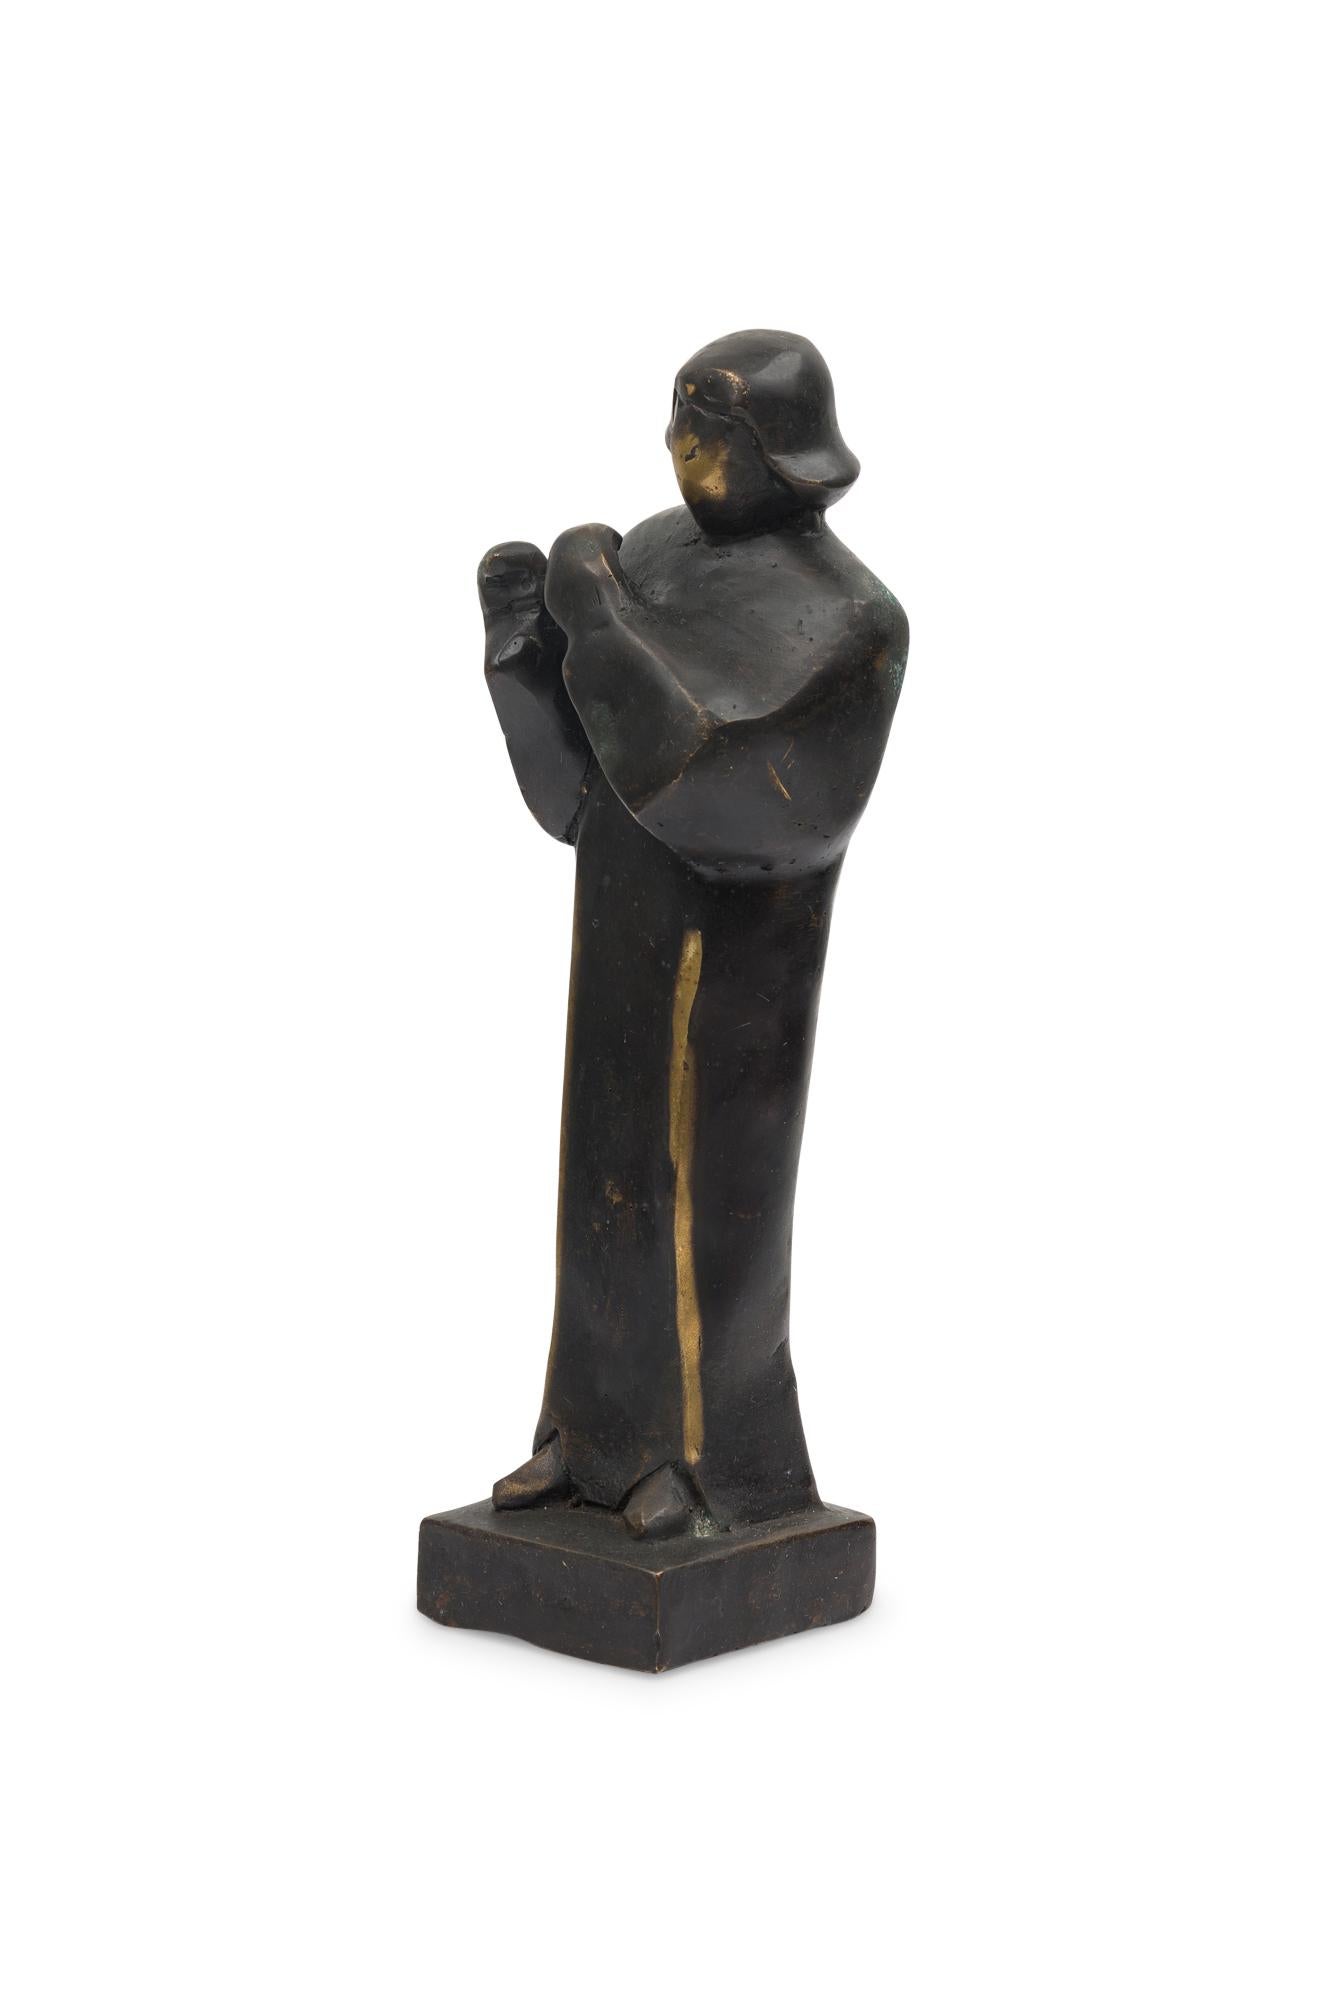 Contemporary hand-forged bronze Brutalist-inspired figural sculpture depicting a preacher finished in an ebonized patina. (PRICED EACH) (